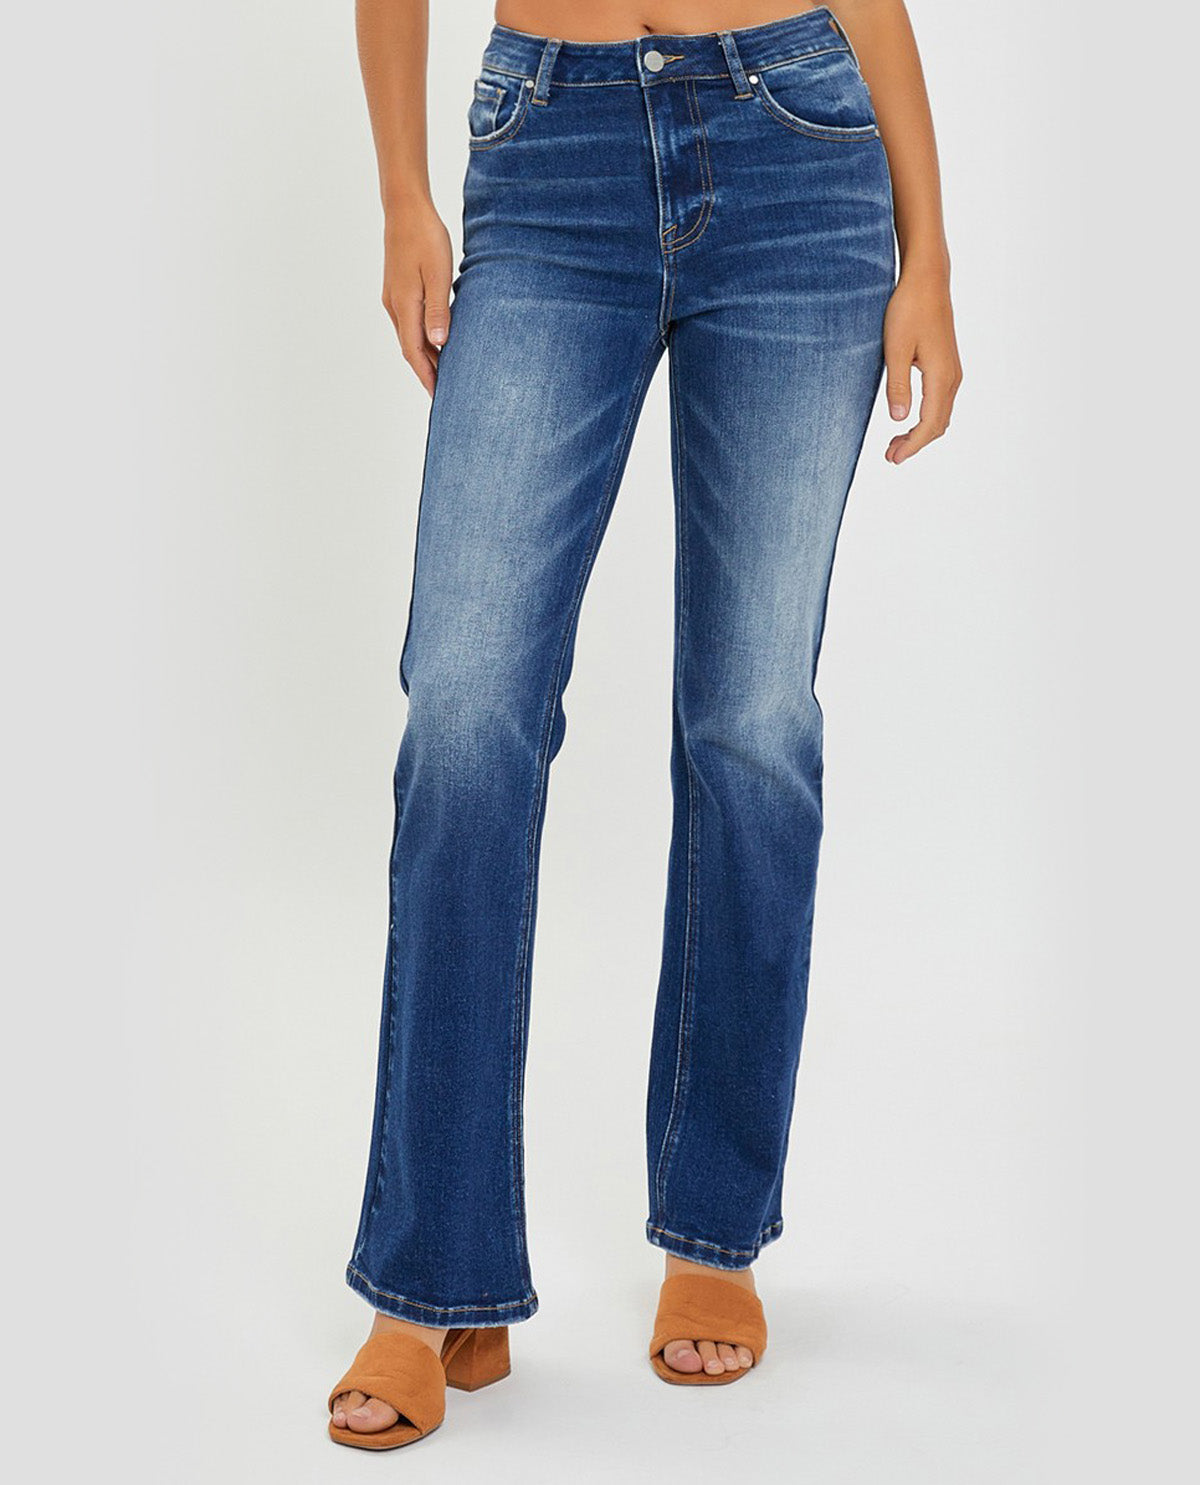 Risen PLUS Mid Rise Relaxed Bootcut Jeans